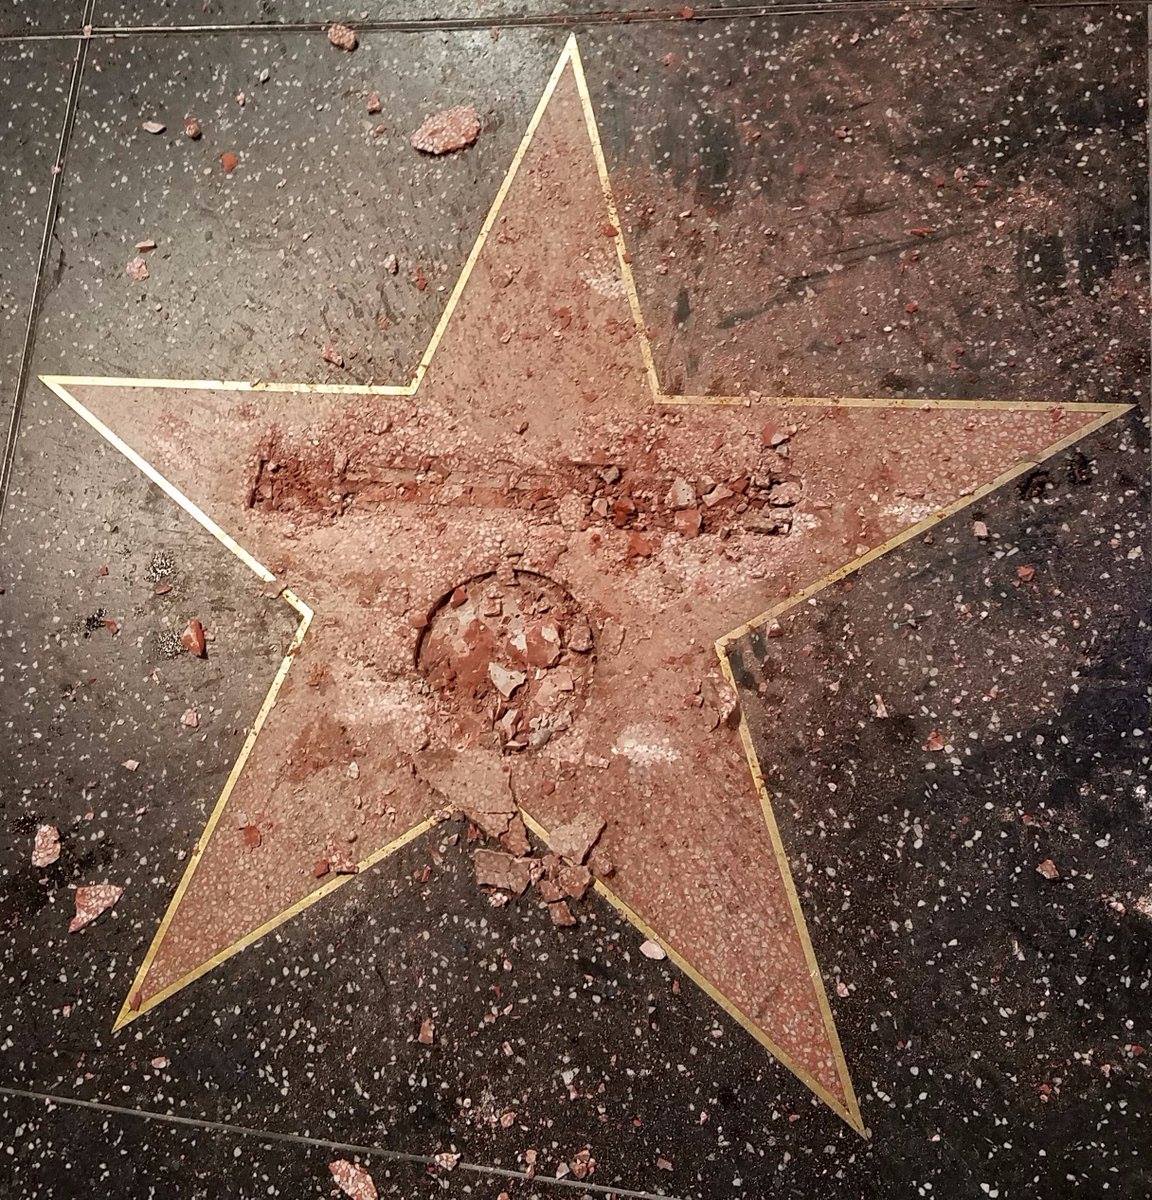 Trump's star is done.  It should now be...